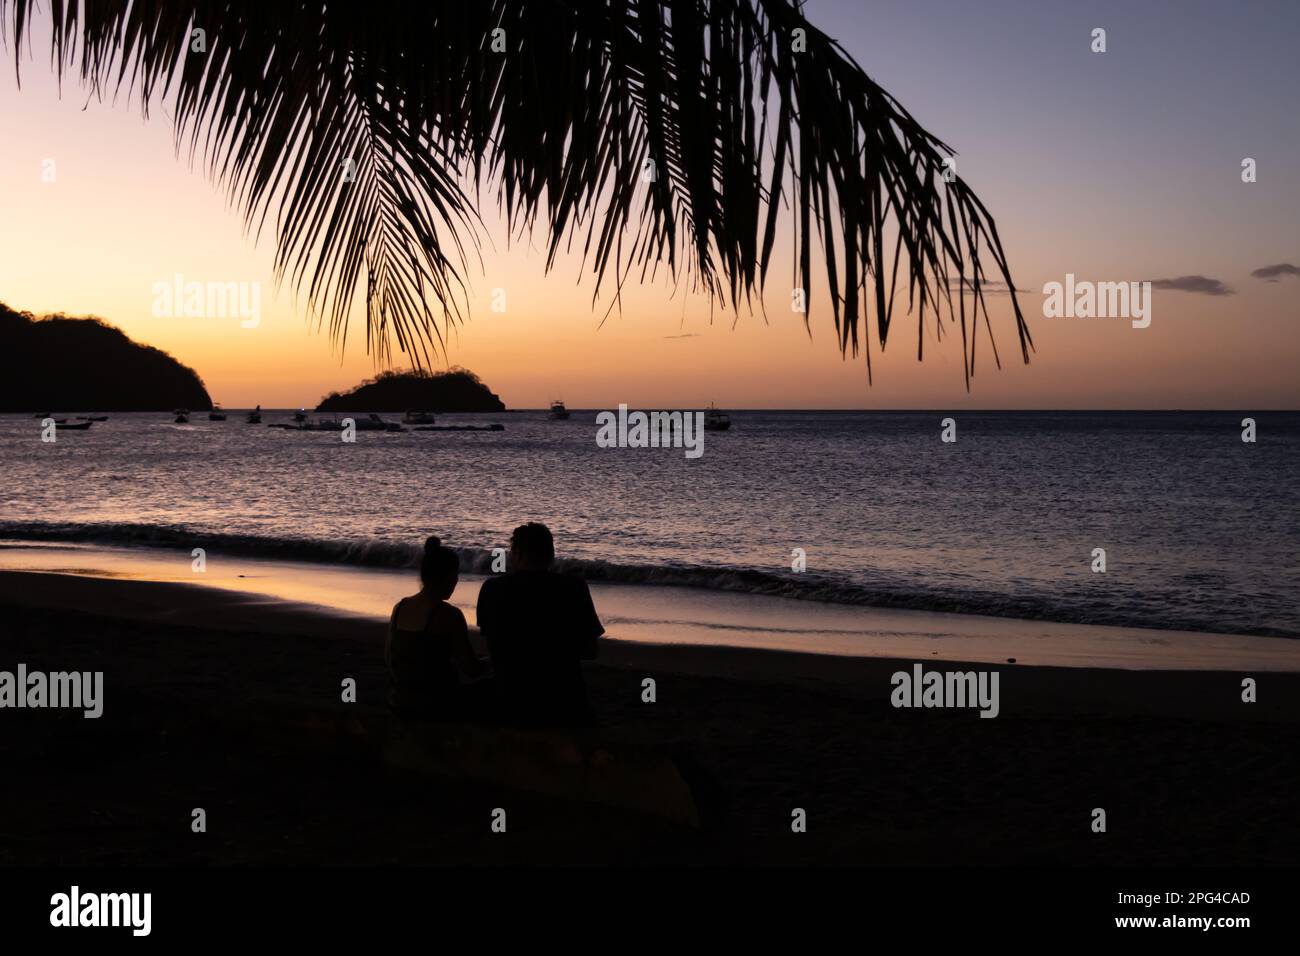 A beautiful sunset in Costa Rica with a silhouette of a man and woman sitting on the beach. A palm branch hangs above their heads. Stock Photo